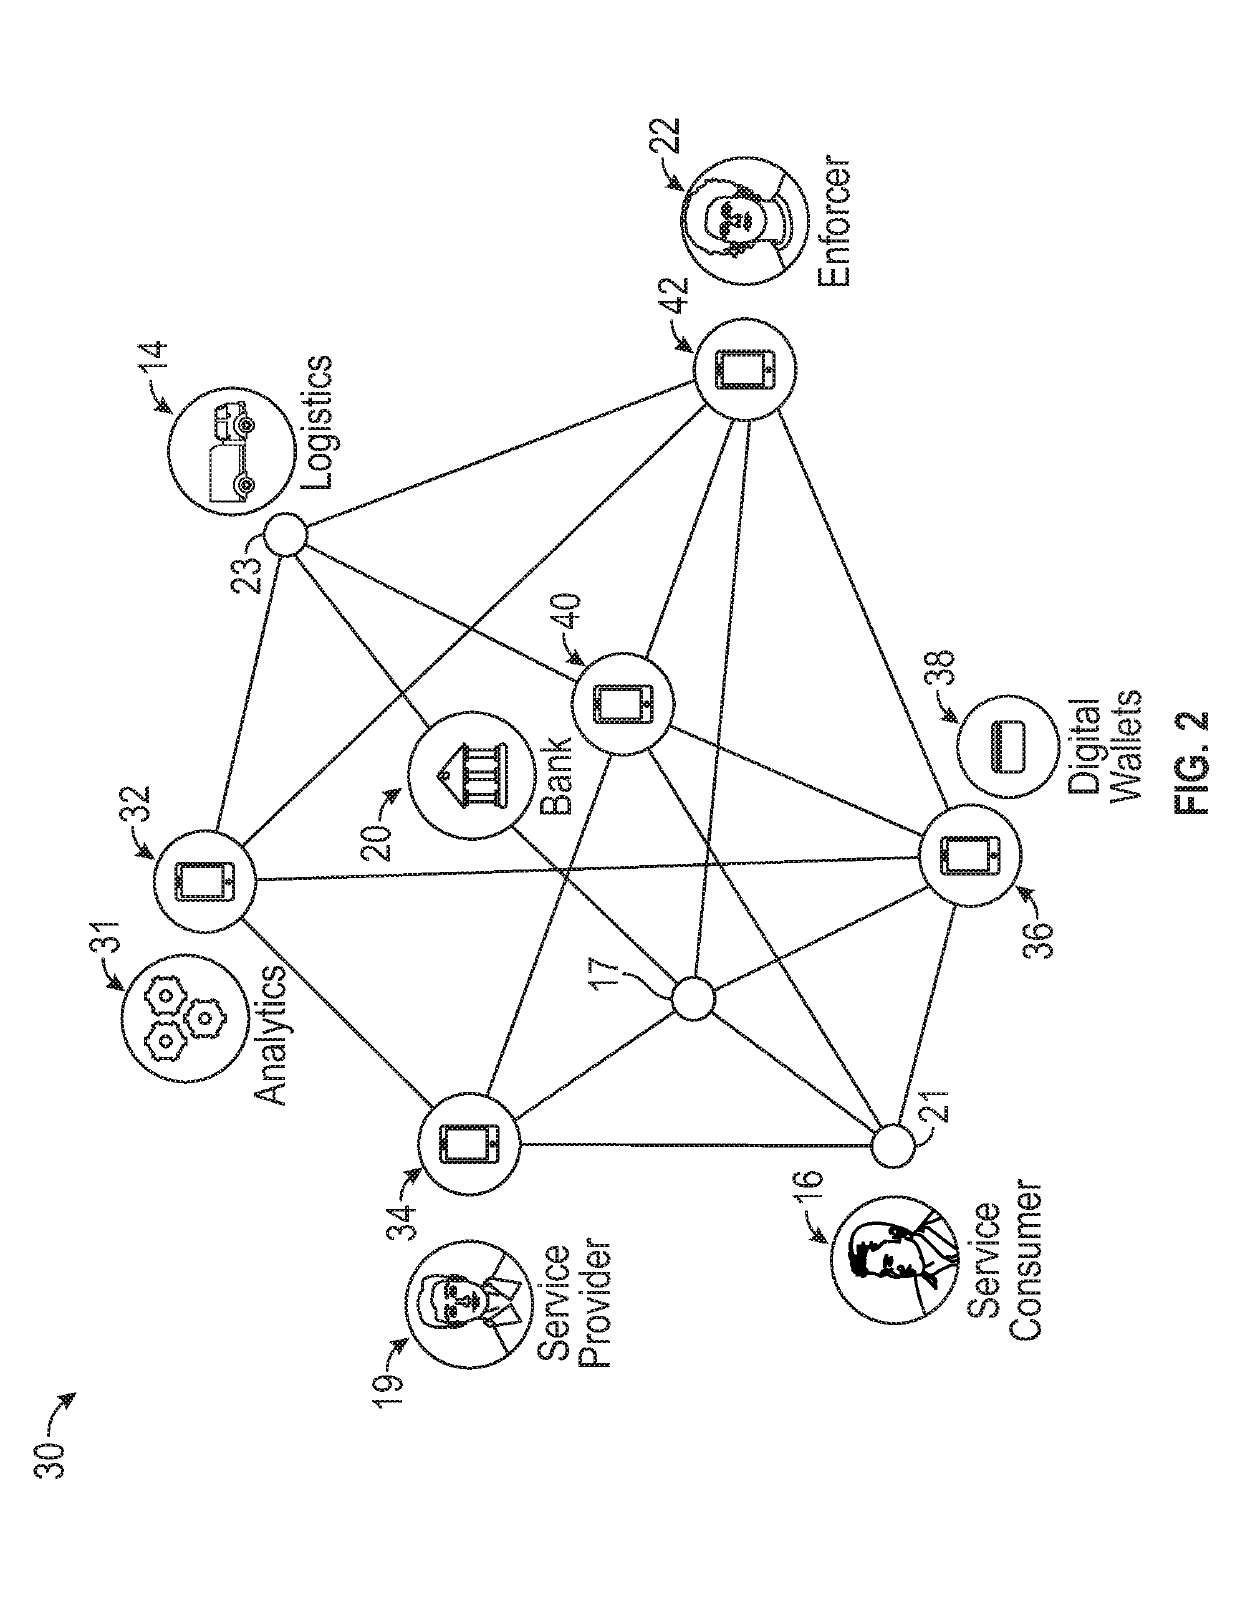 Blockchain driven unified multi-party system and method for monitored transactions of urban assets